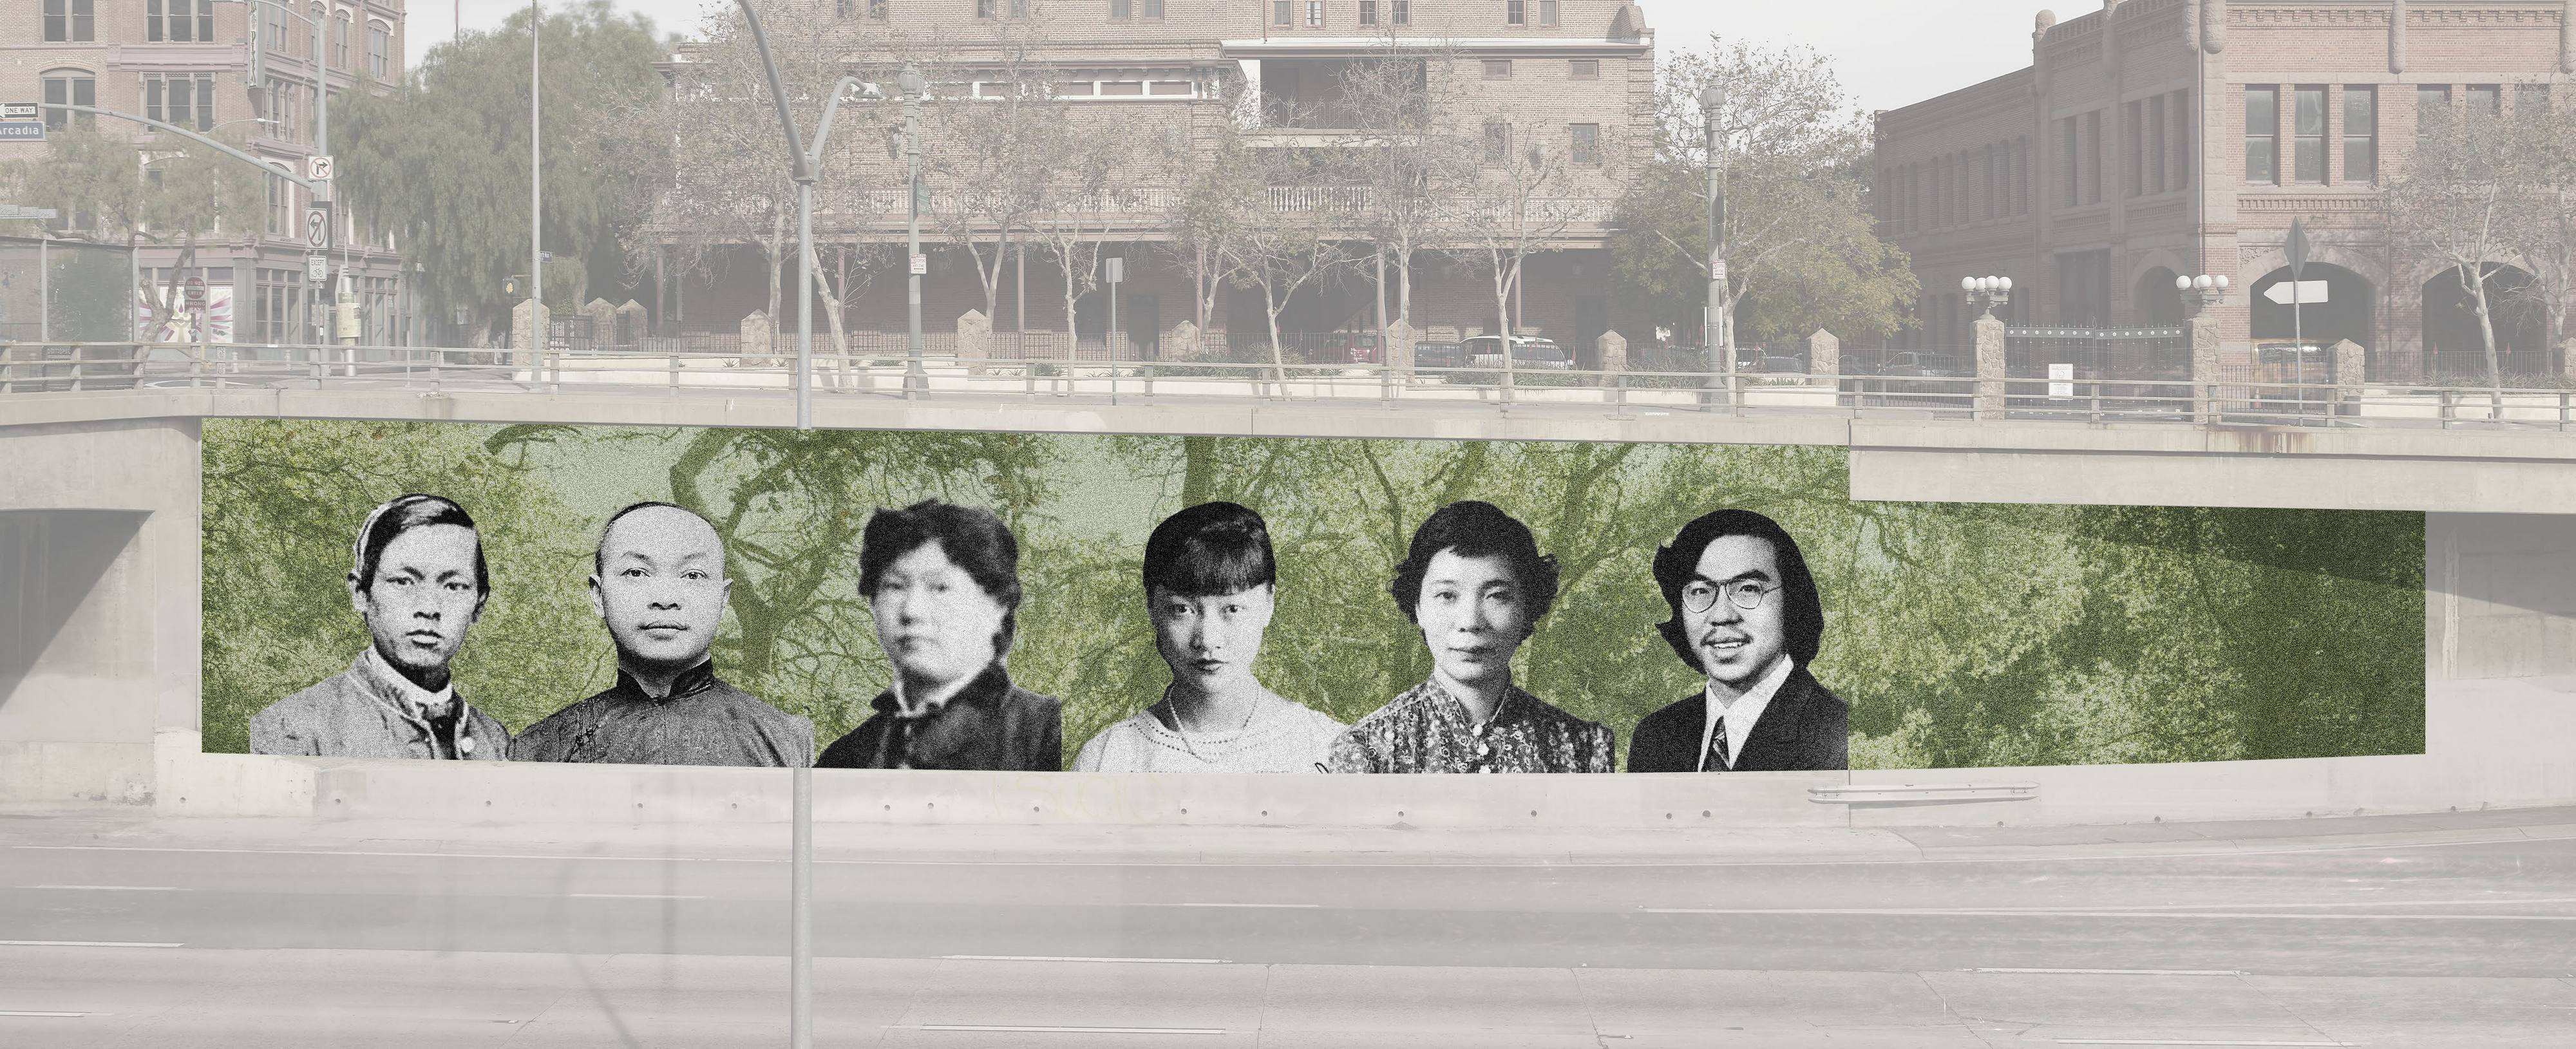 Memorial to the Victims of the 1871 Chinese Massacre. Design proposal image by Sze Tsung Nicolás Leong and Judy Chui-Hua Chung